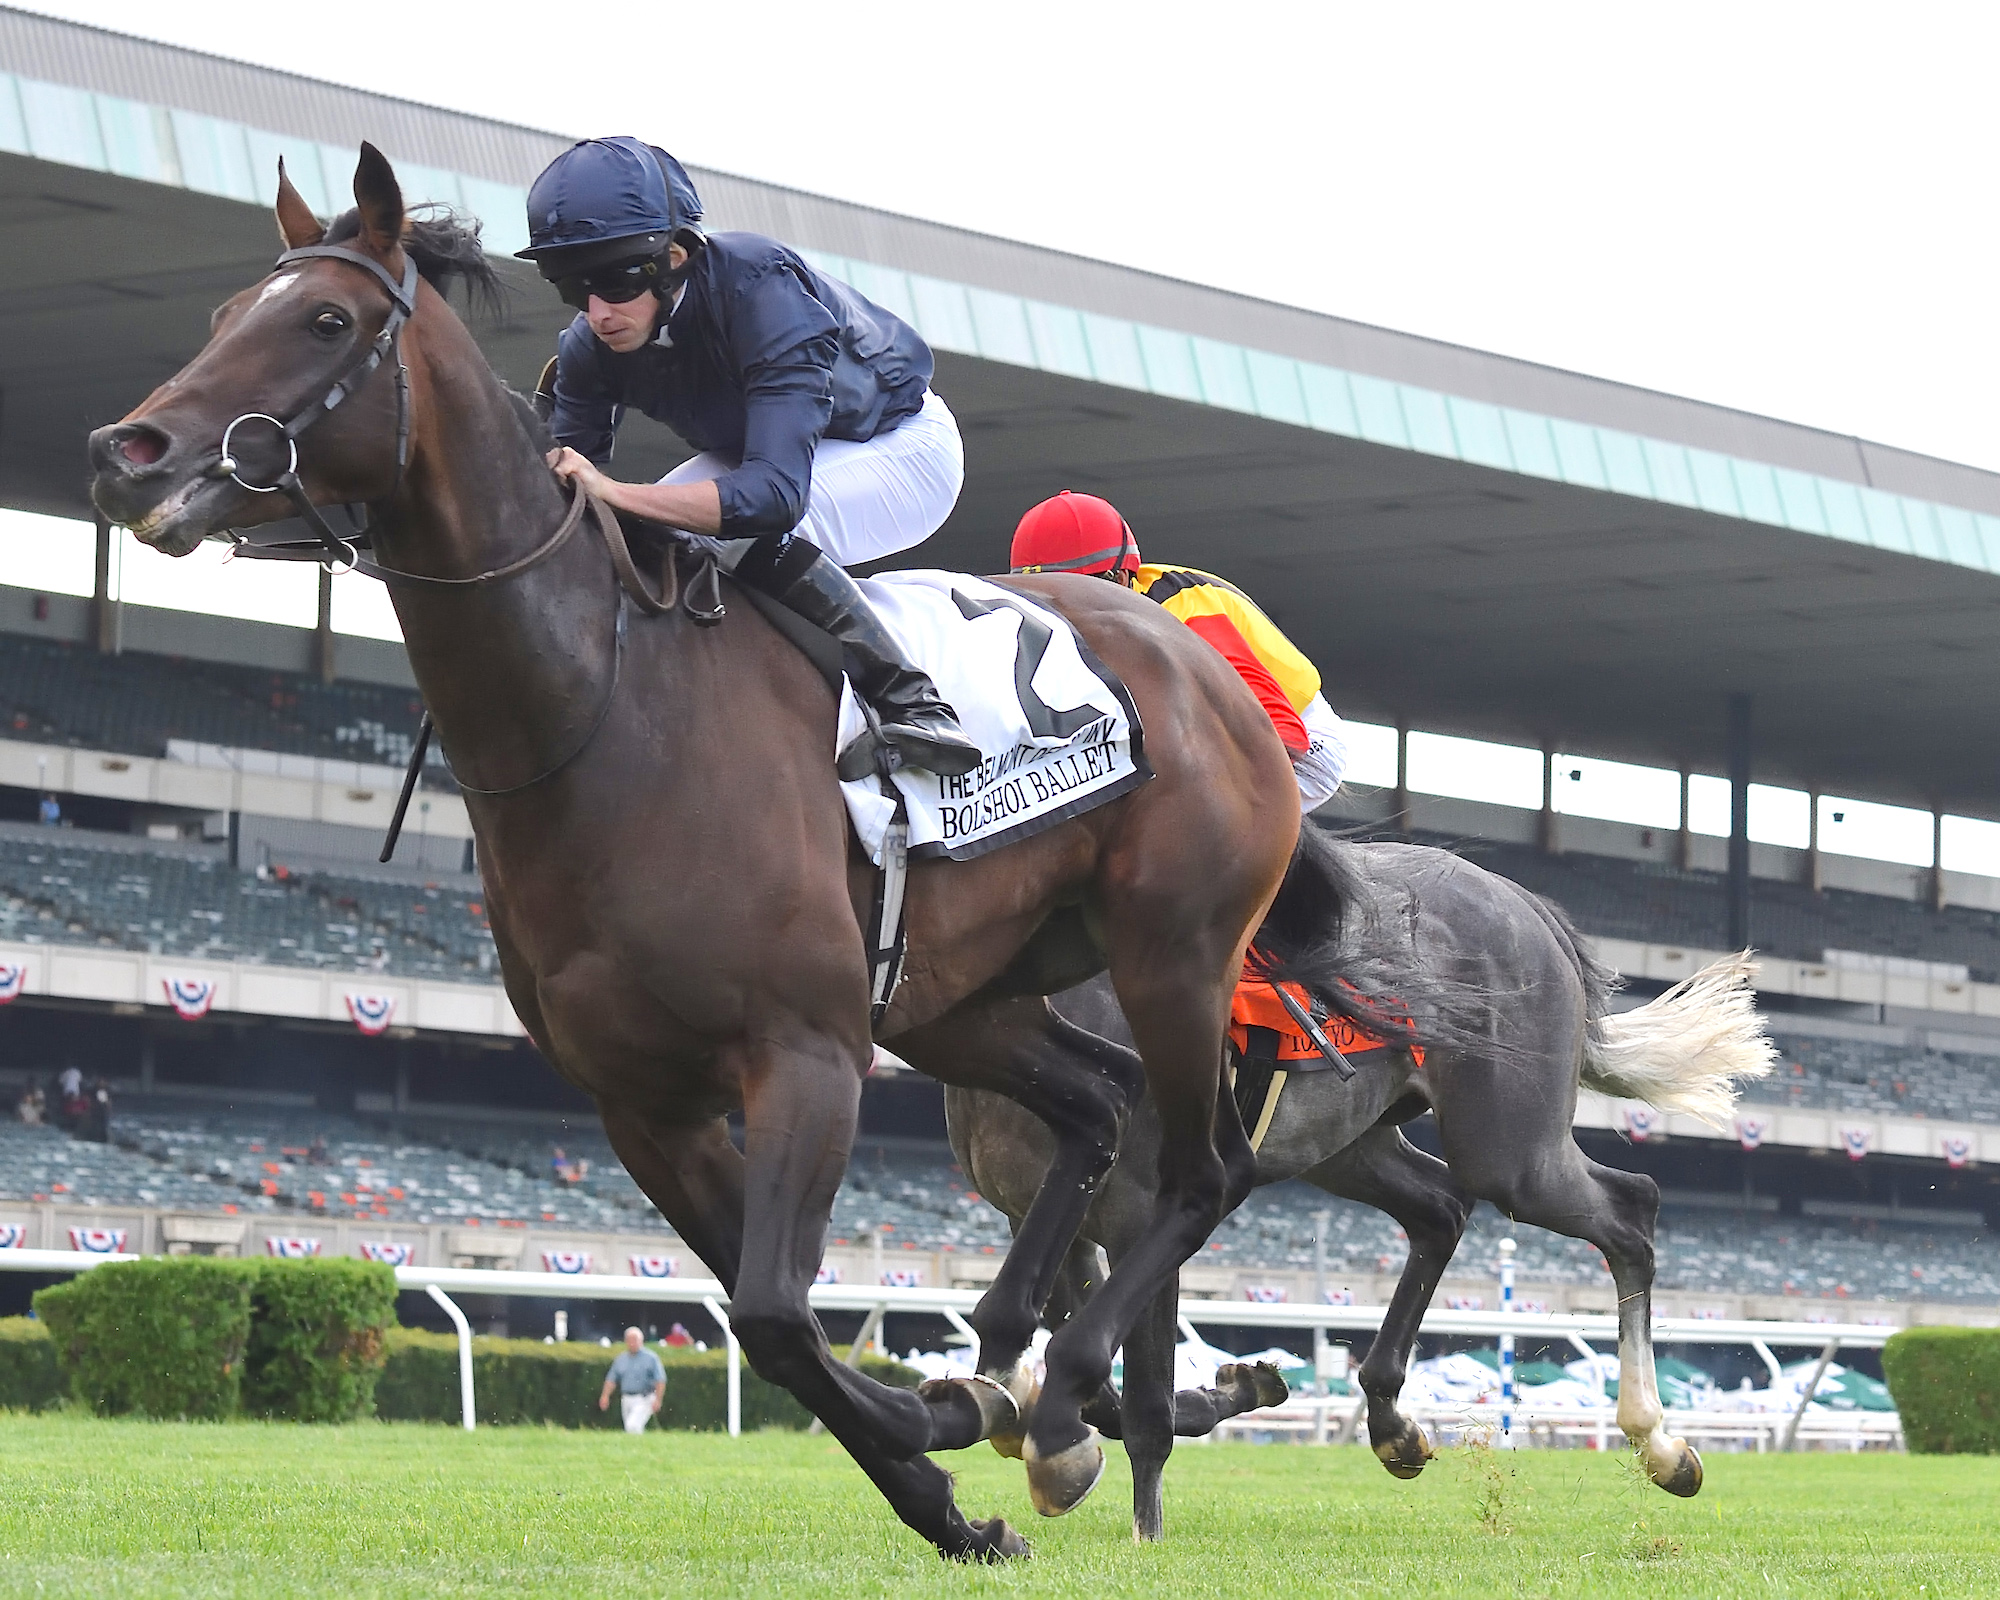 Bolshoi Ballet (Ryan Moore) becomes the 92nd individual G1 winner for Galileo, taking the Belmont Derby on Saturday. Photo: NYRA.com